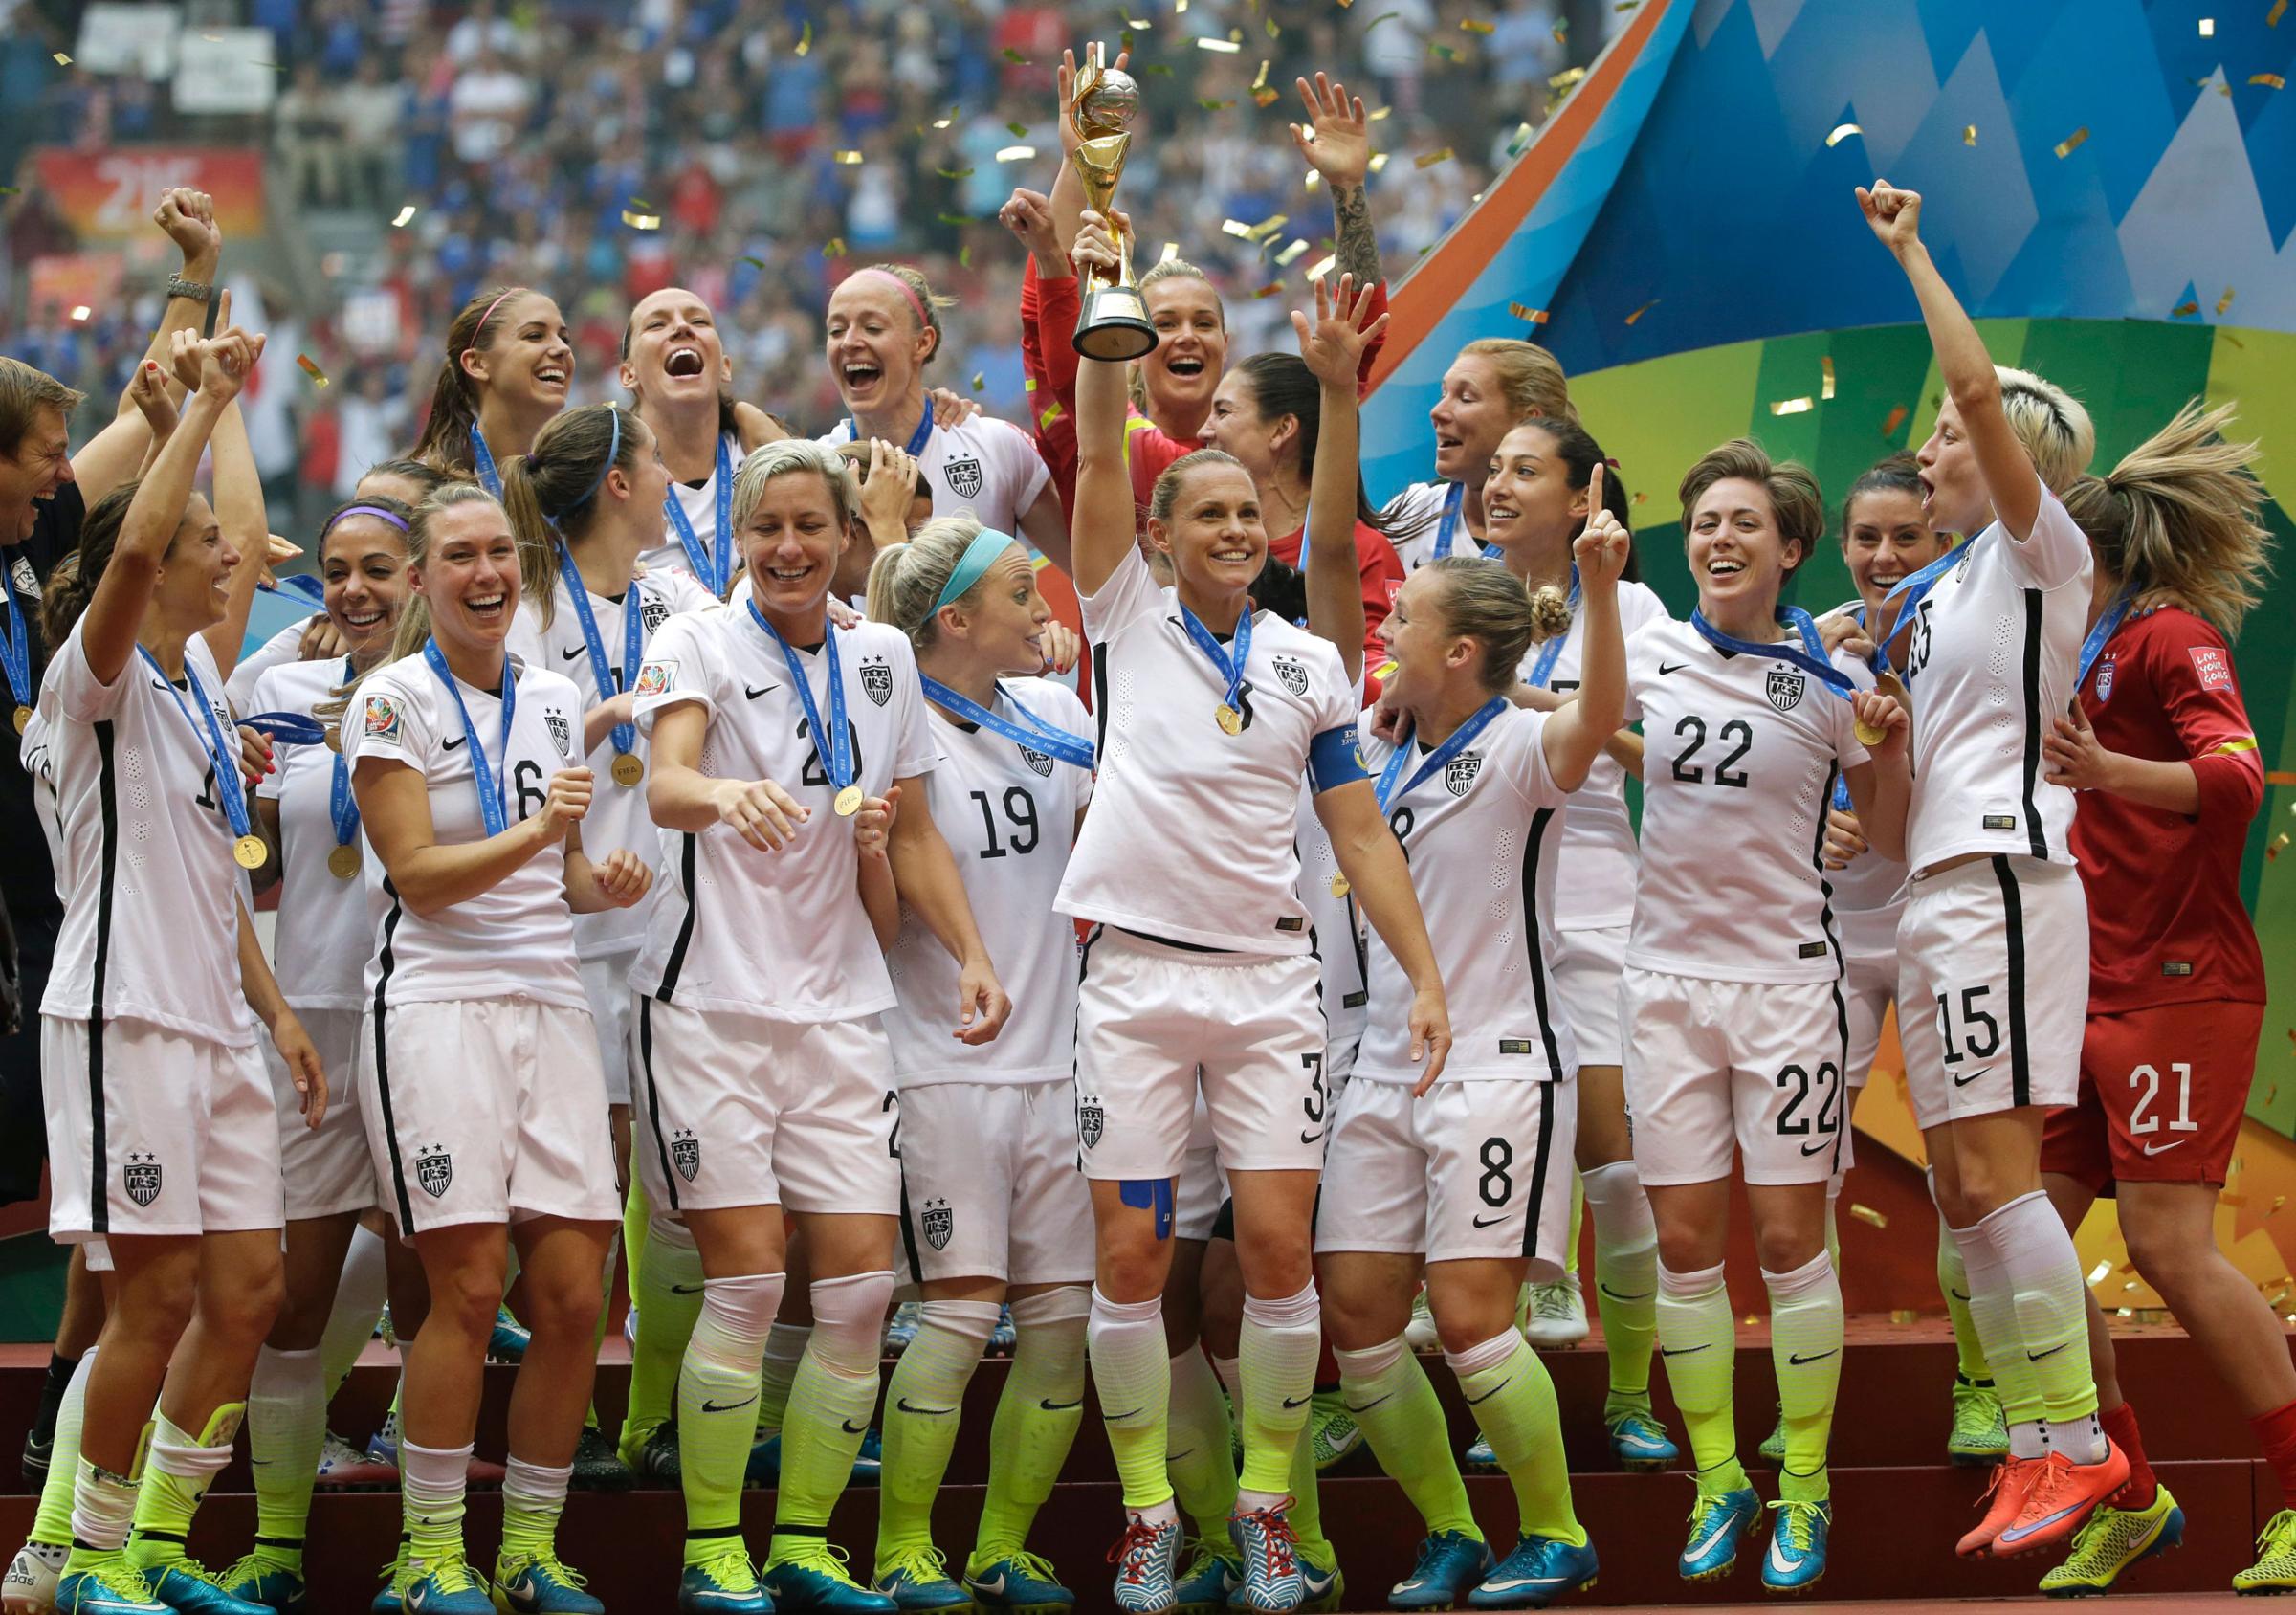 The United States Women's National Team celebrates with the trophy after they beat Japan 5-2 in the FIFA Women's World Cup soccer championship in Vancouver, British Columbia, Canada, Sunday, July 5, 2015. (AP Photo/Elaine Thompson)